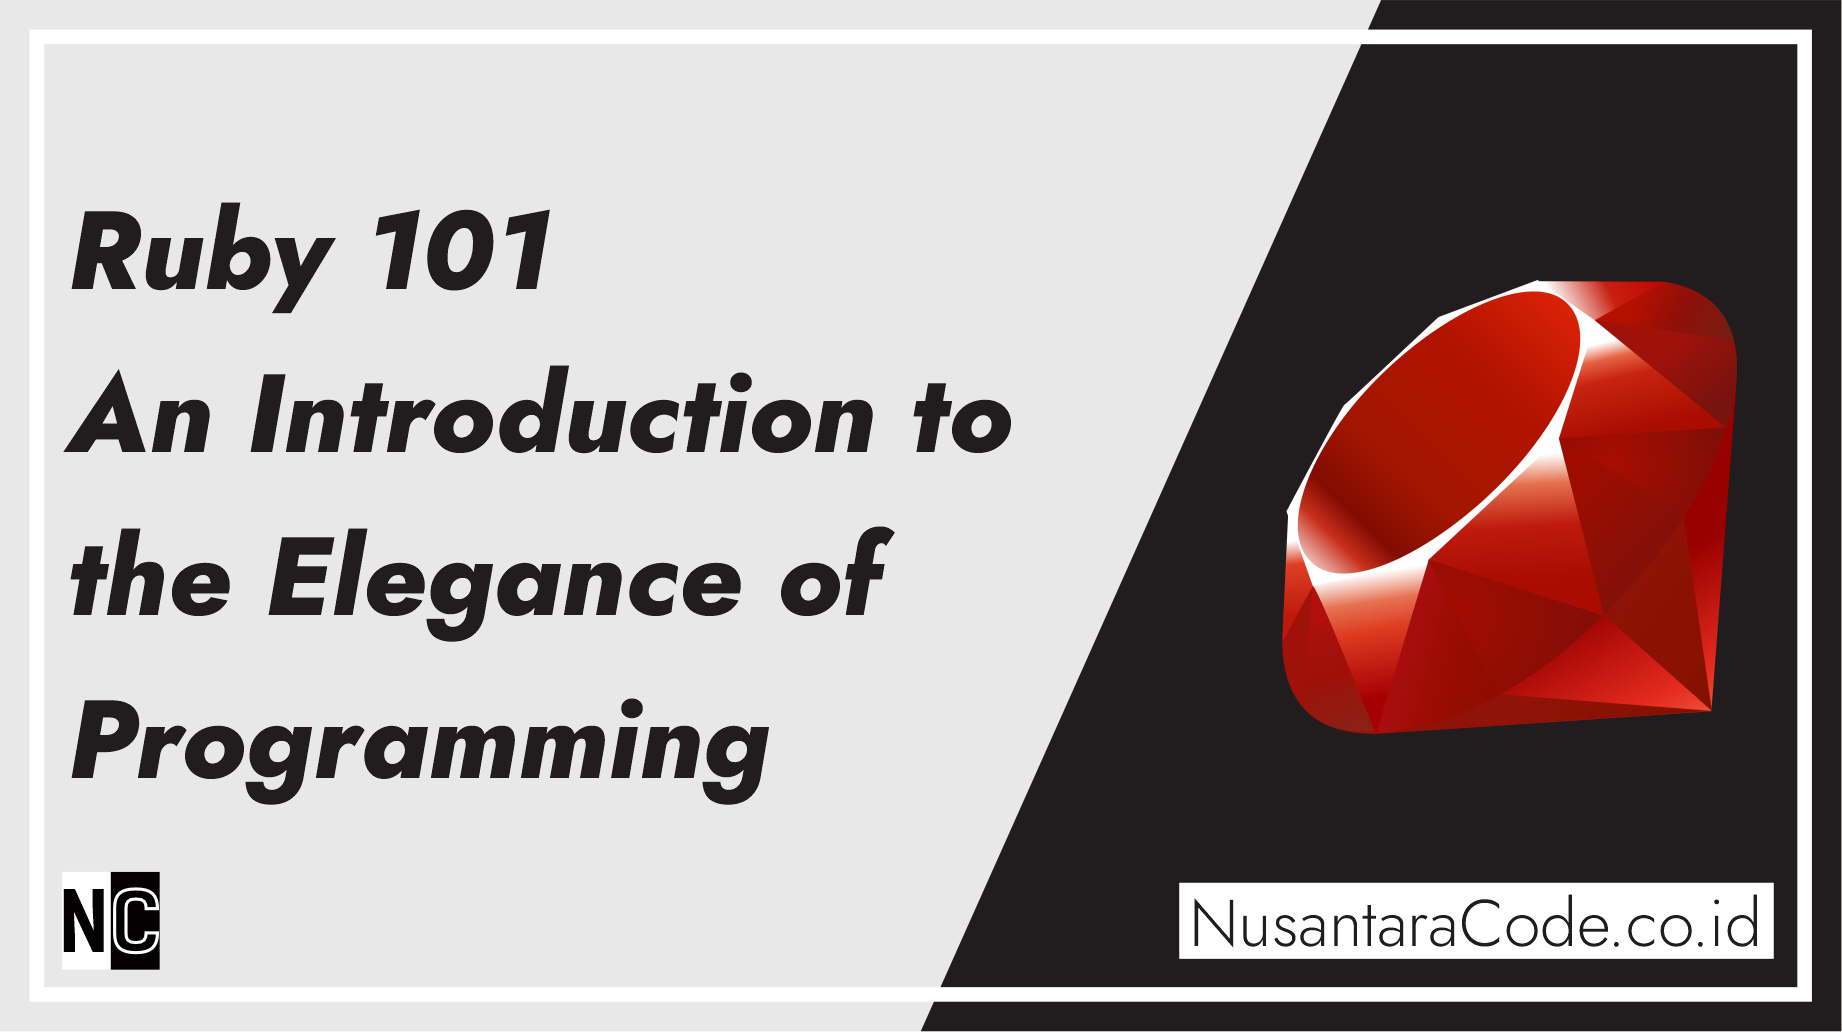 Ruby 101 – An Introduction to the Elegance of Programming